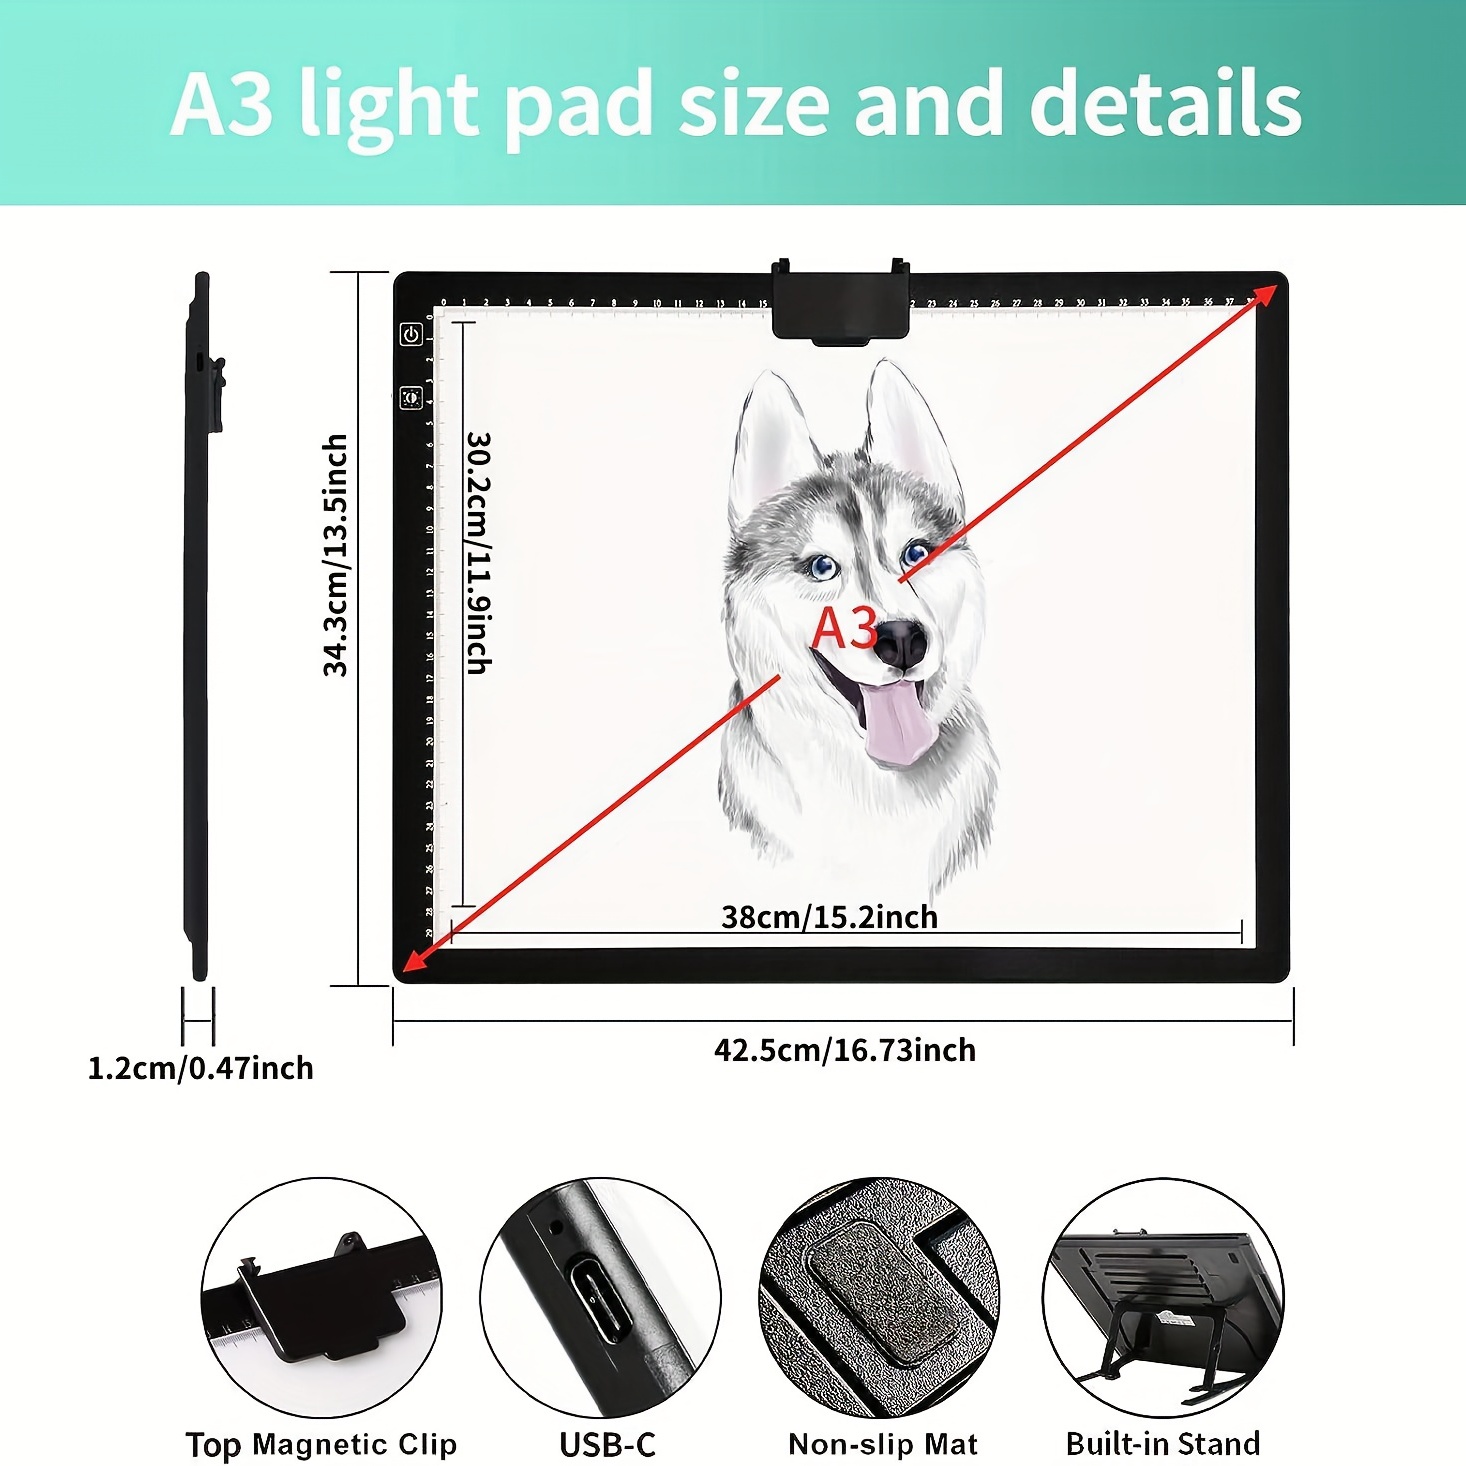  Wireless Rechargeable A4 LED Light Pad w/Built-in